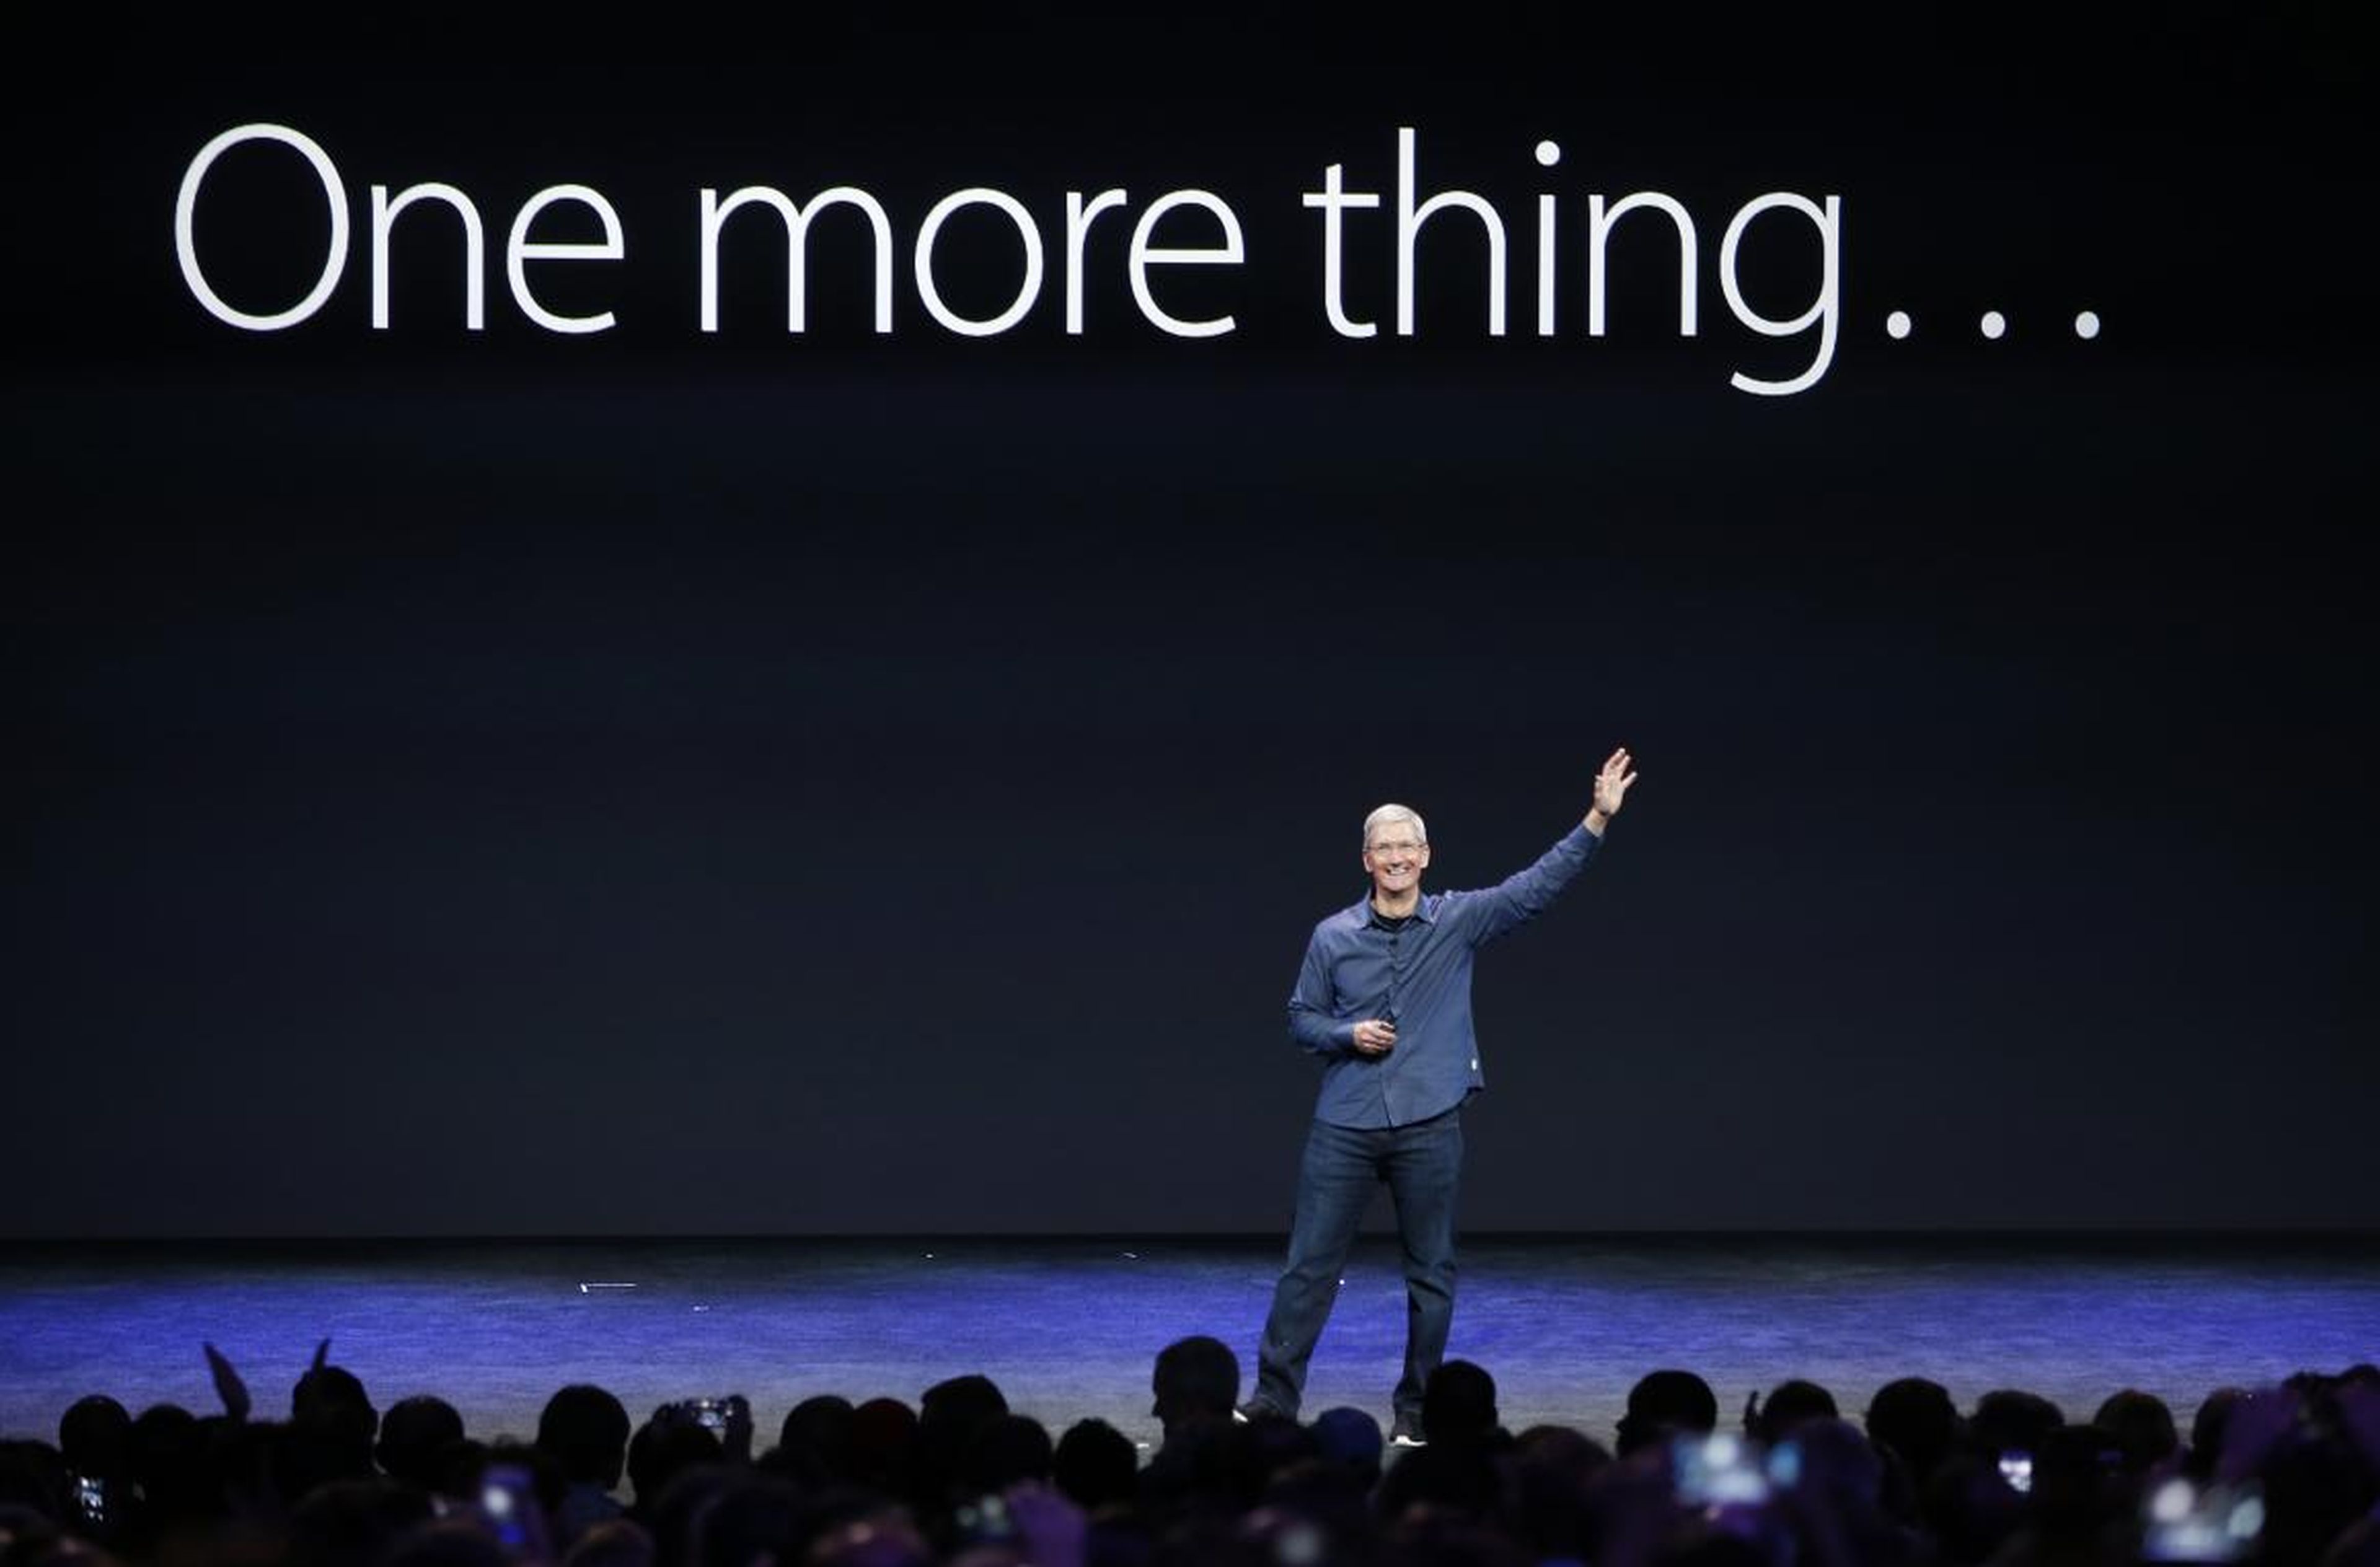 Tim Cook got the nod as full-time CEO after Jobs' resignation. Apple has continued to grow under Cook, becoming the first $1 trillion company in American history. And the rest, as they say, is history.